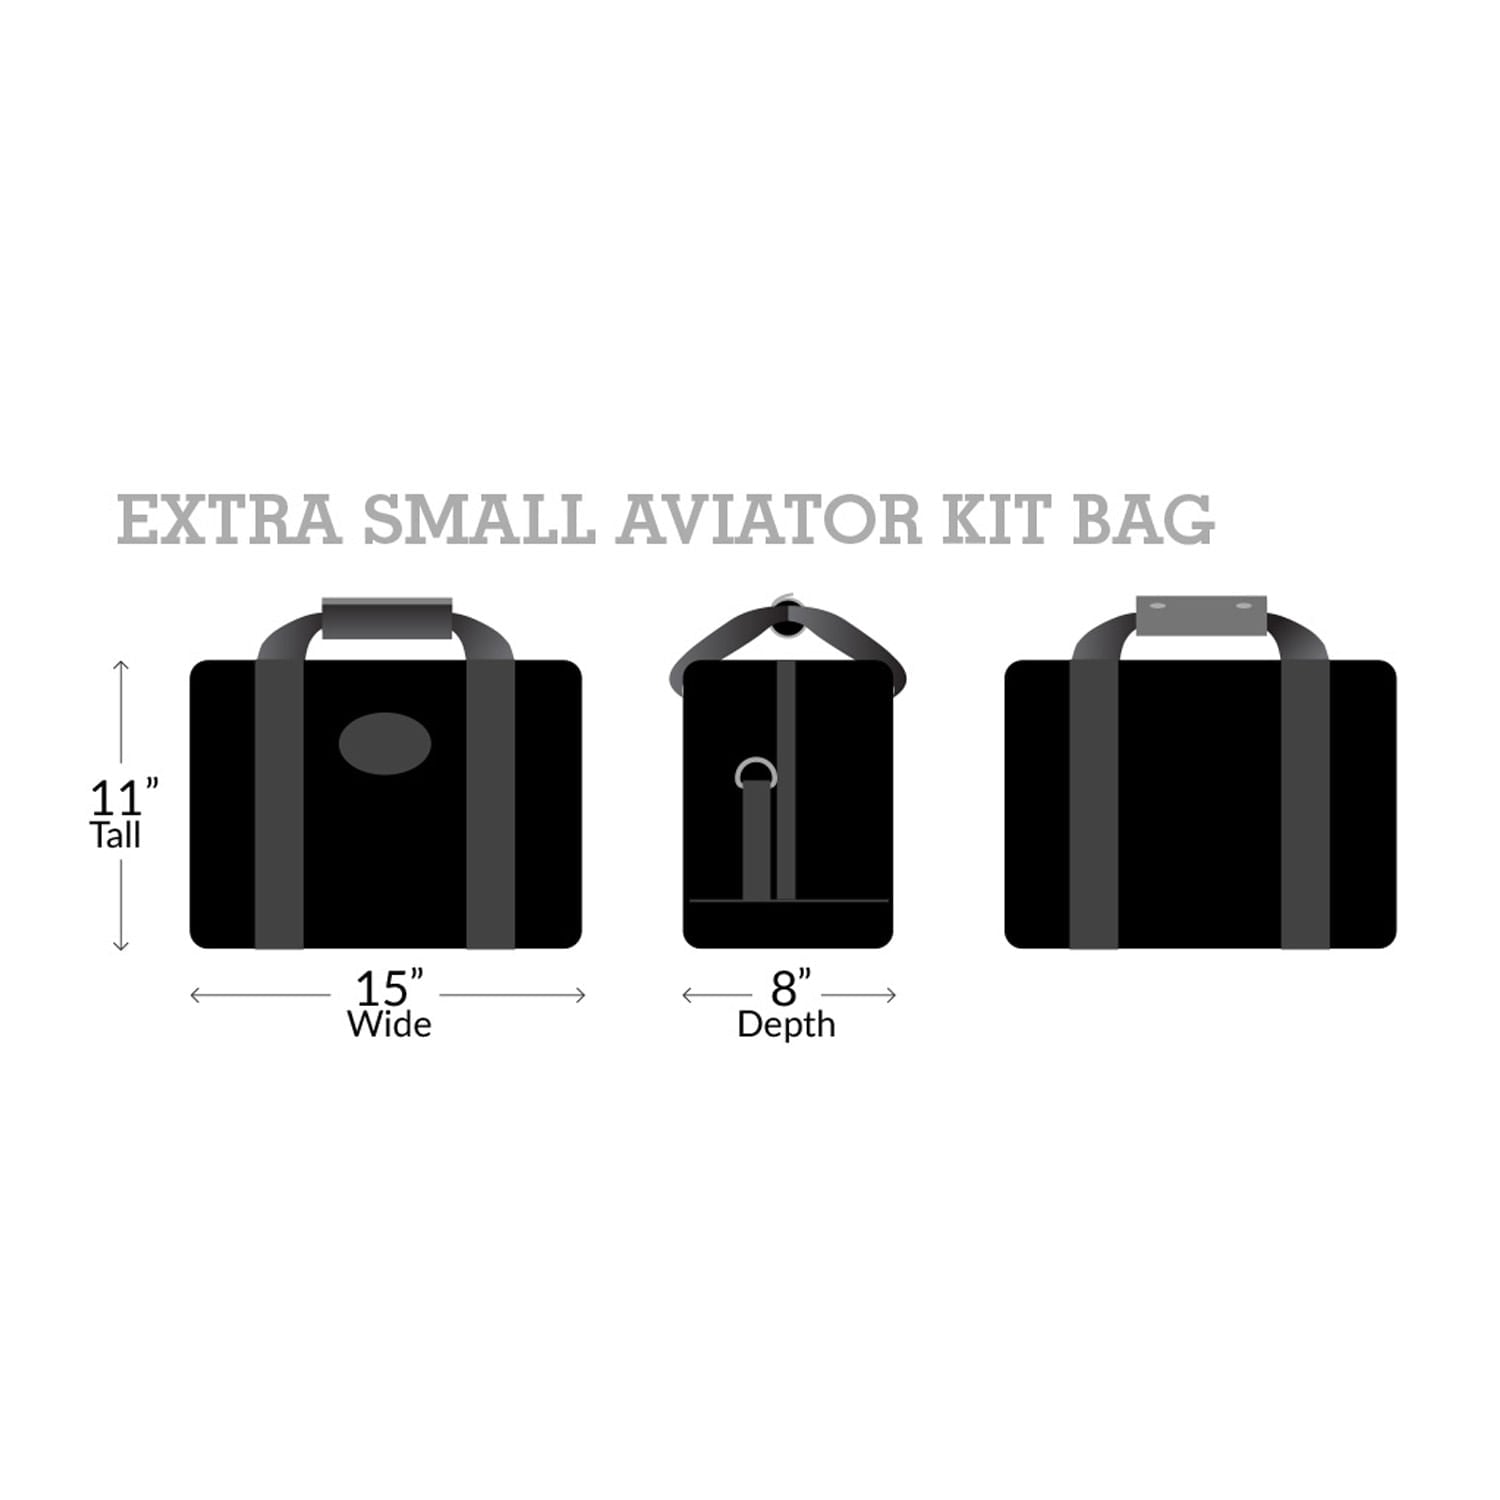 Extra Small Aviator Kit Bag dimensions : eleven inches tall x fifteen inches wide x eight inches depth. 